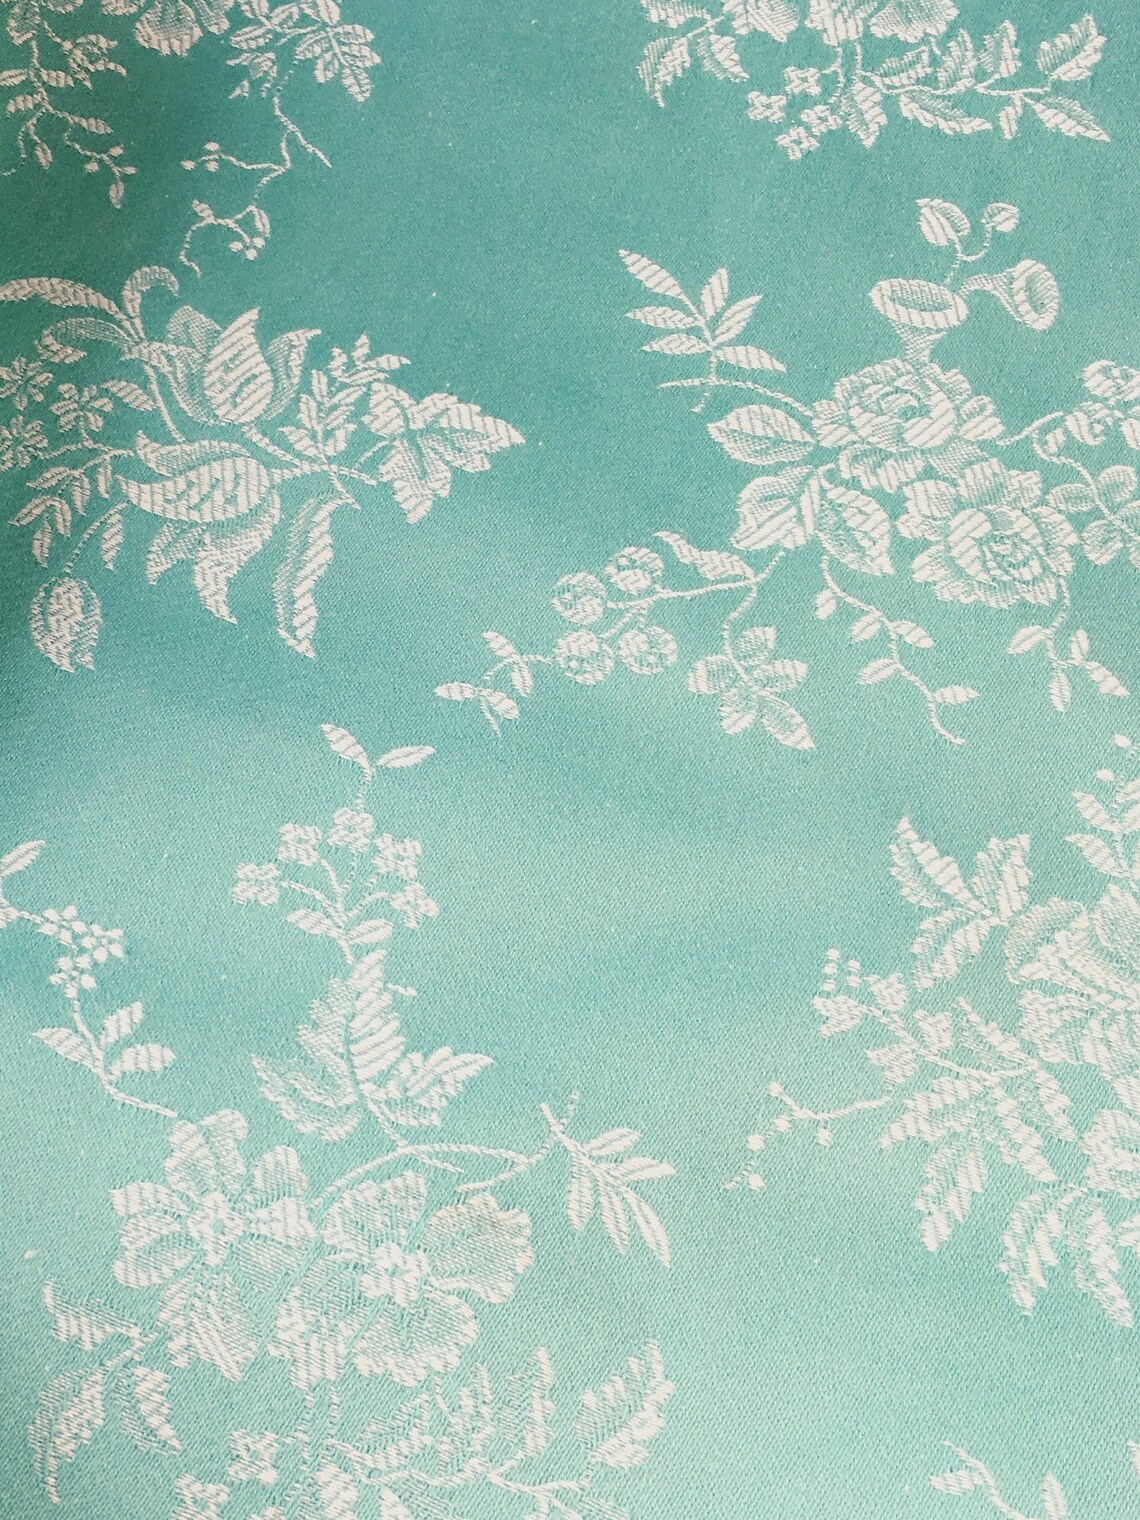 Pale Green 1940s Antique Floral Ticking Fabric Damask Cotton | Etsy